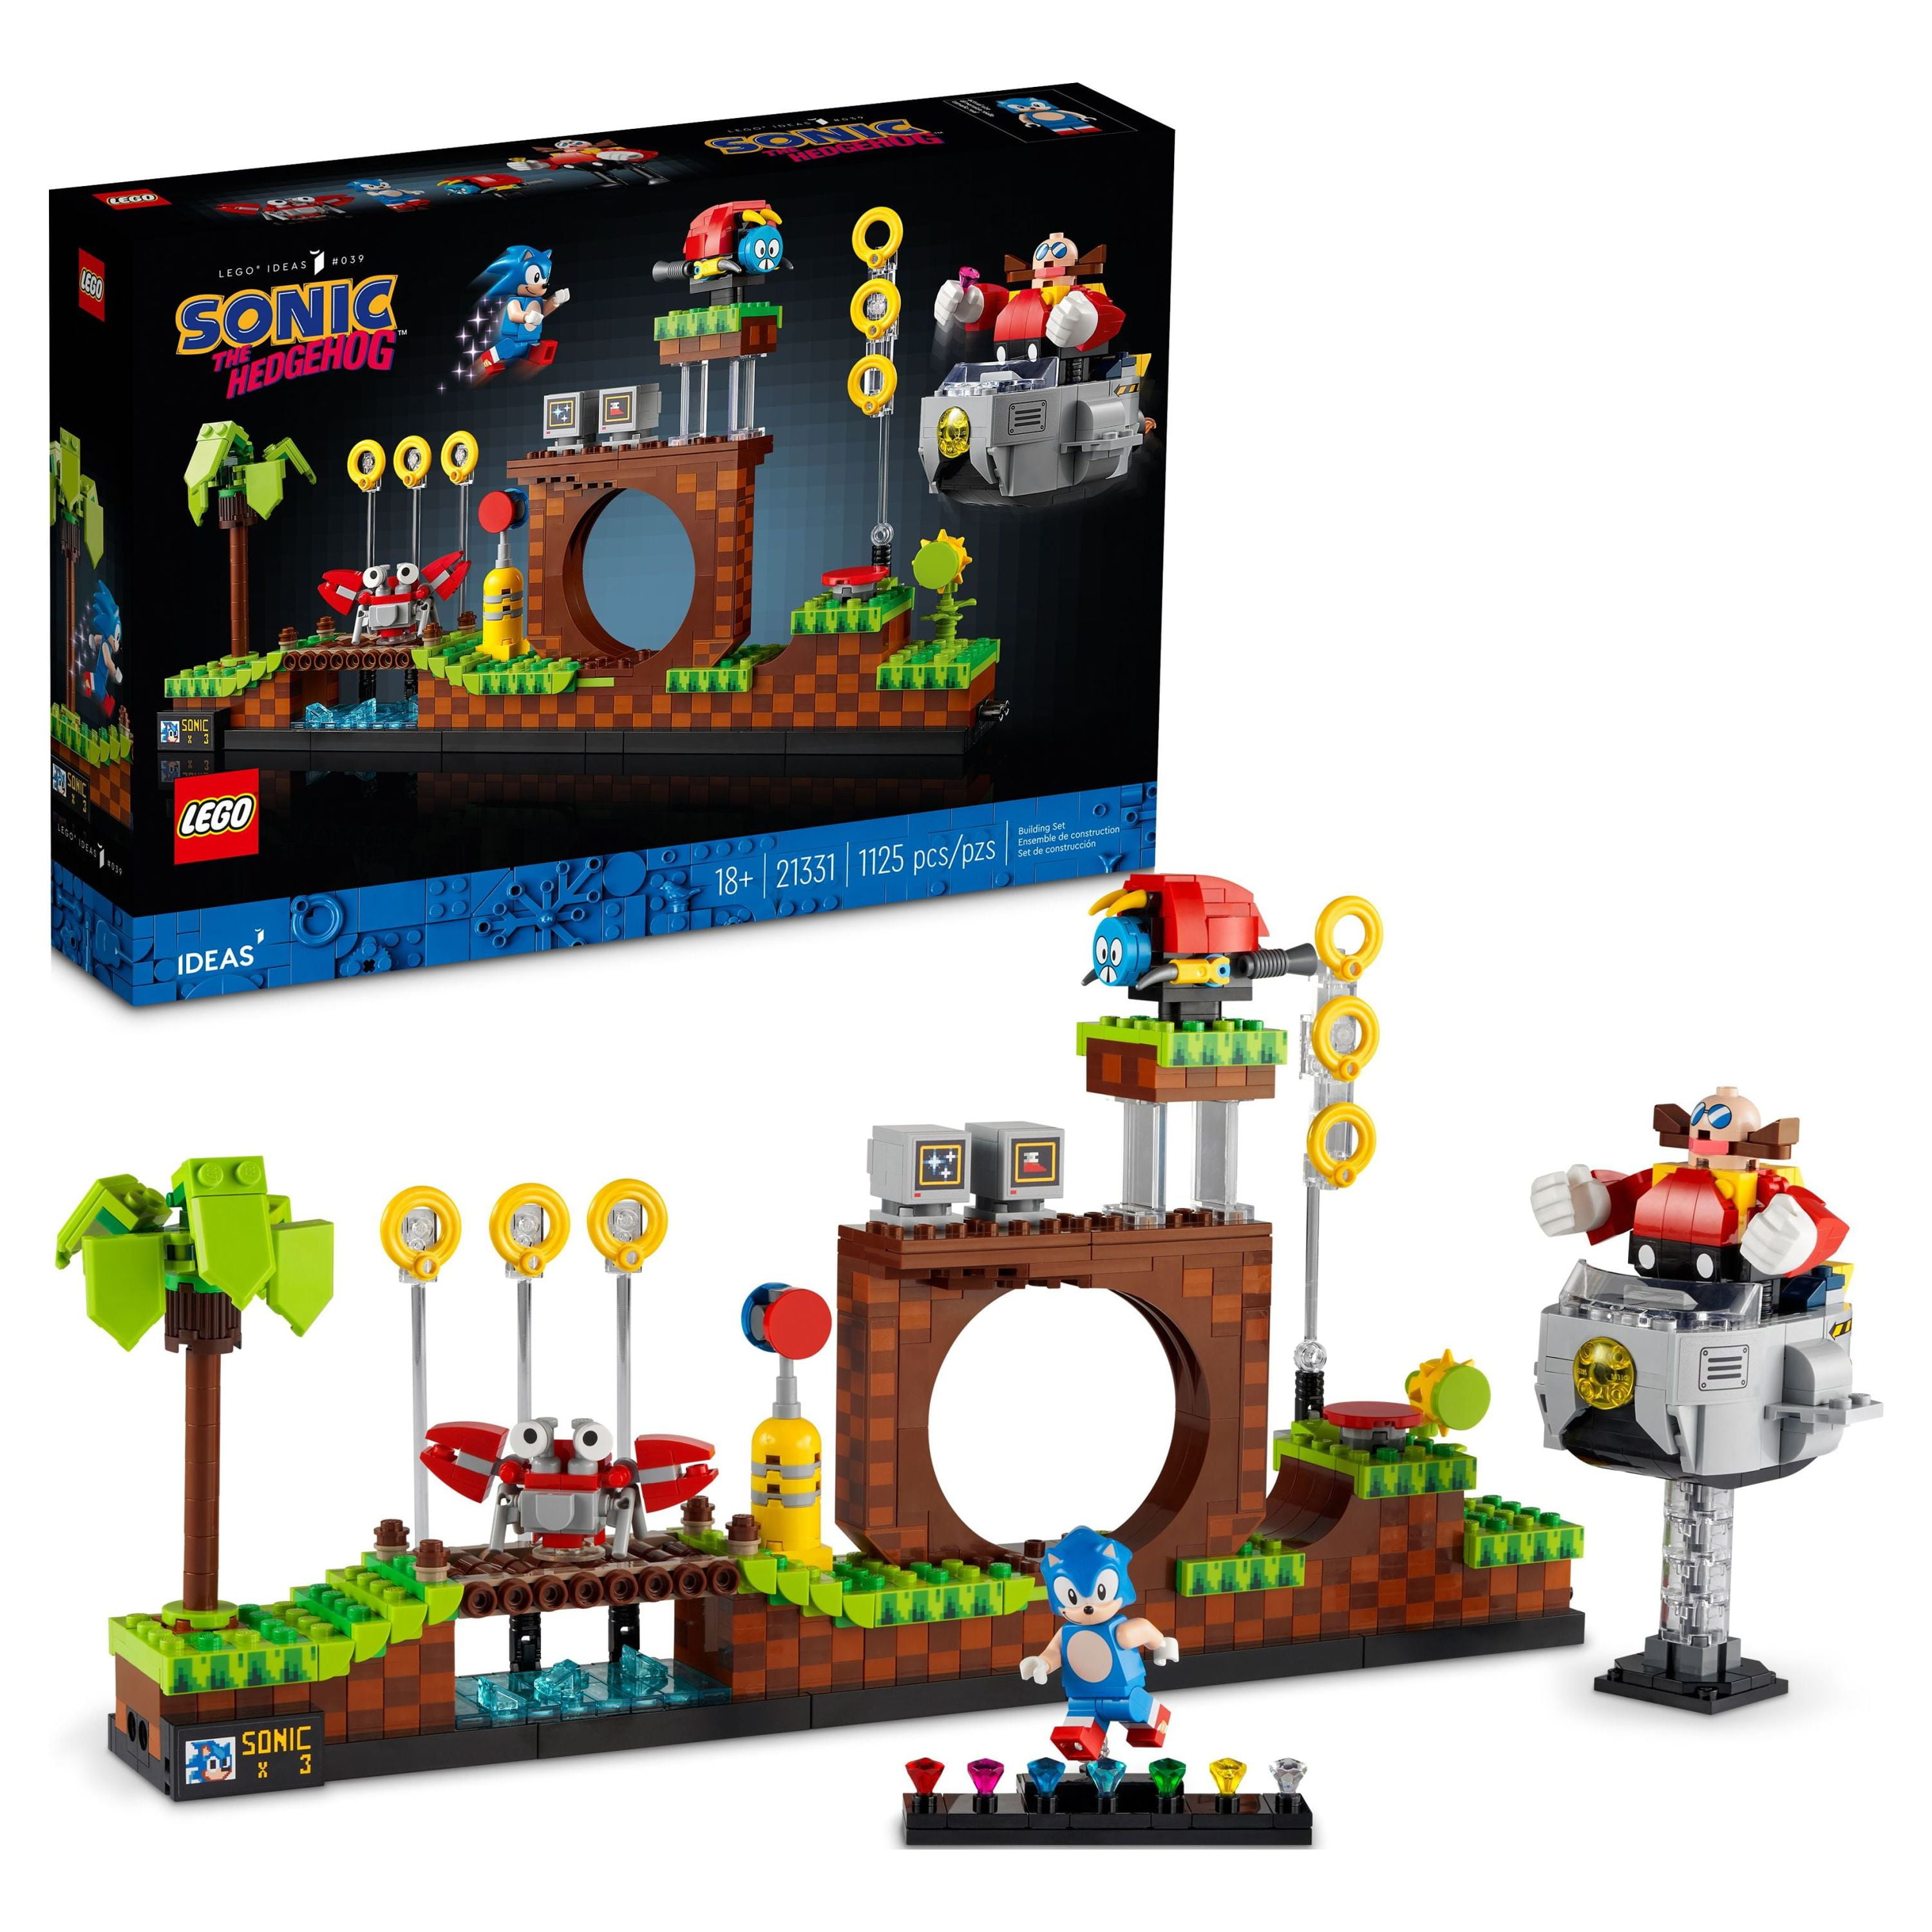 LEGO Sonic sets expected to launch in summer 2023